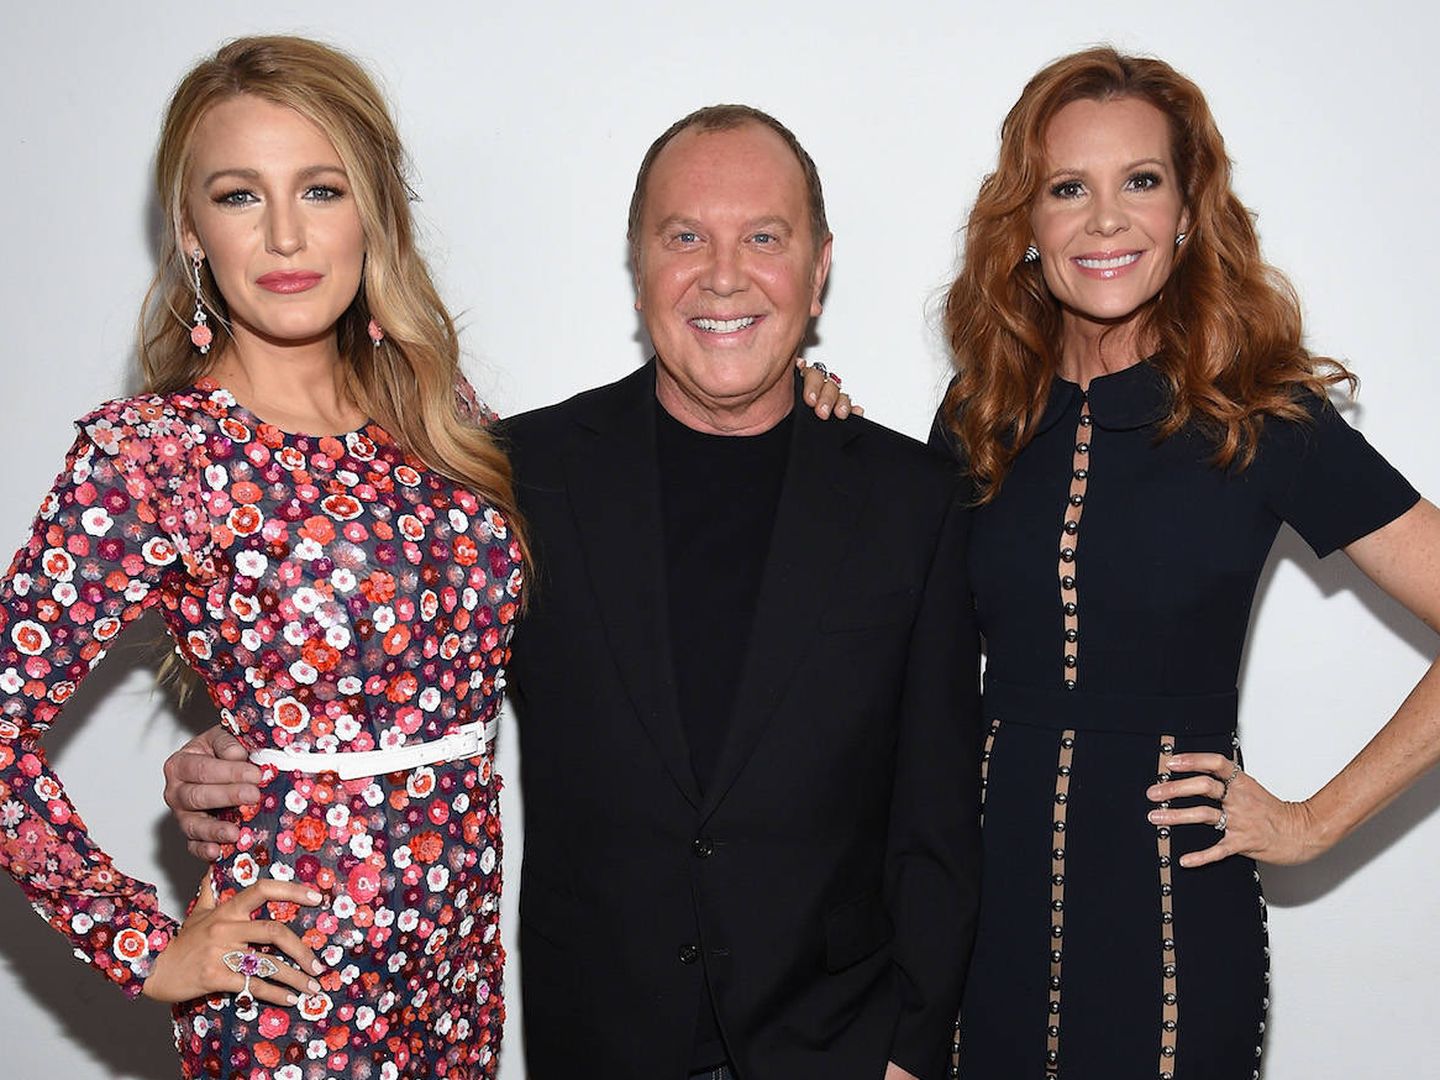 Michael Kors con Blake Lively y su madre (Getty).